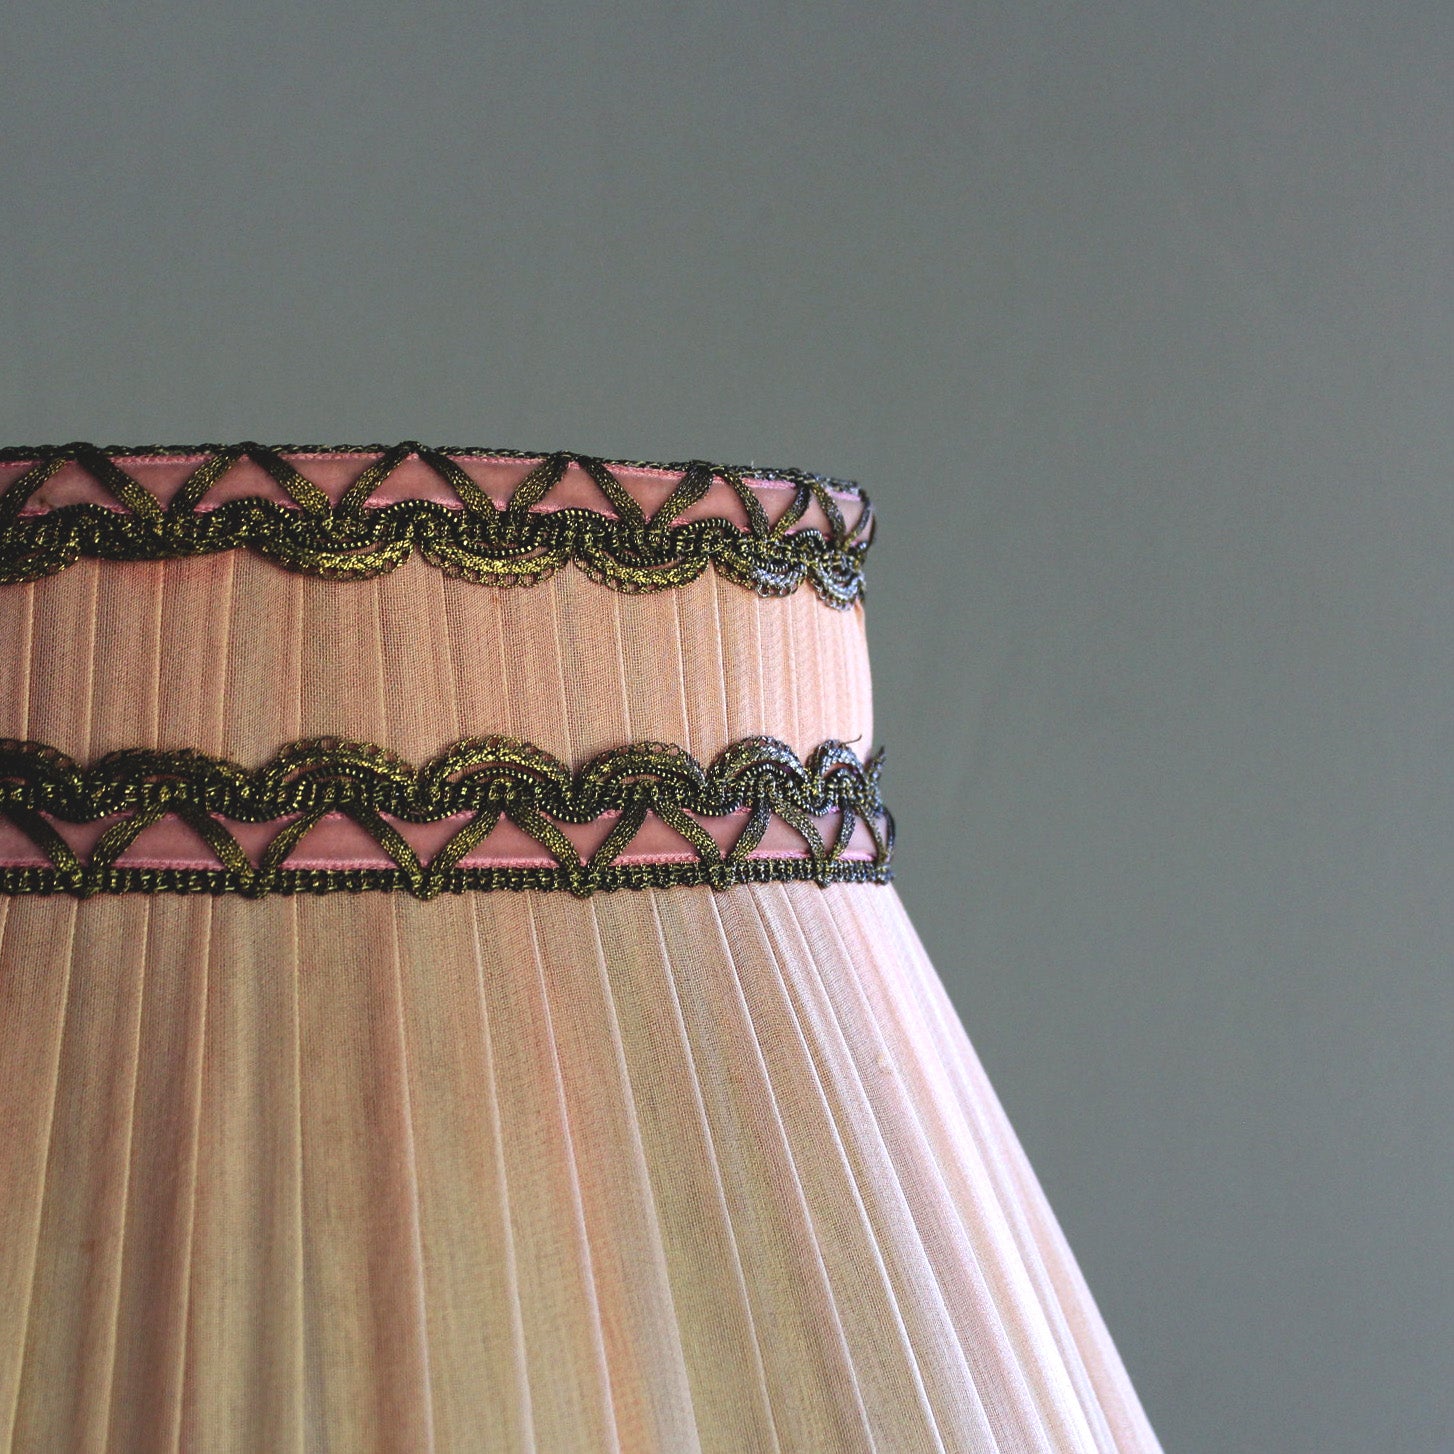 Bell Lampshade in Dusky Pink